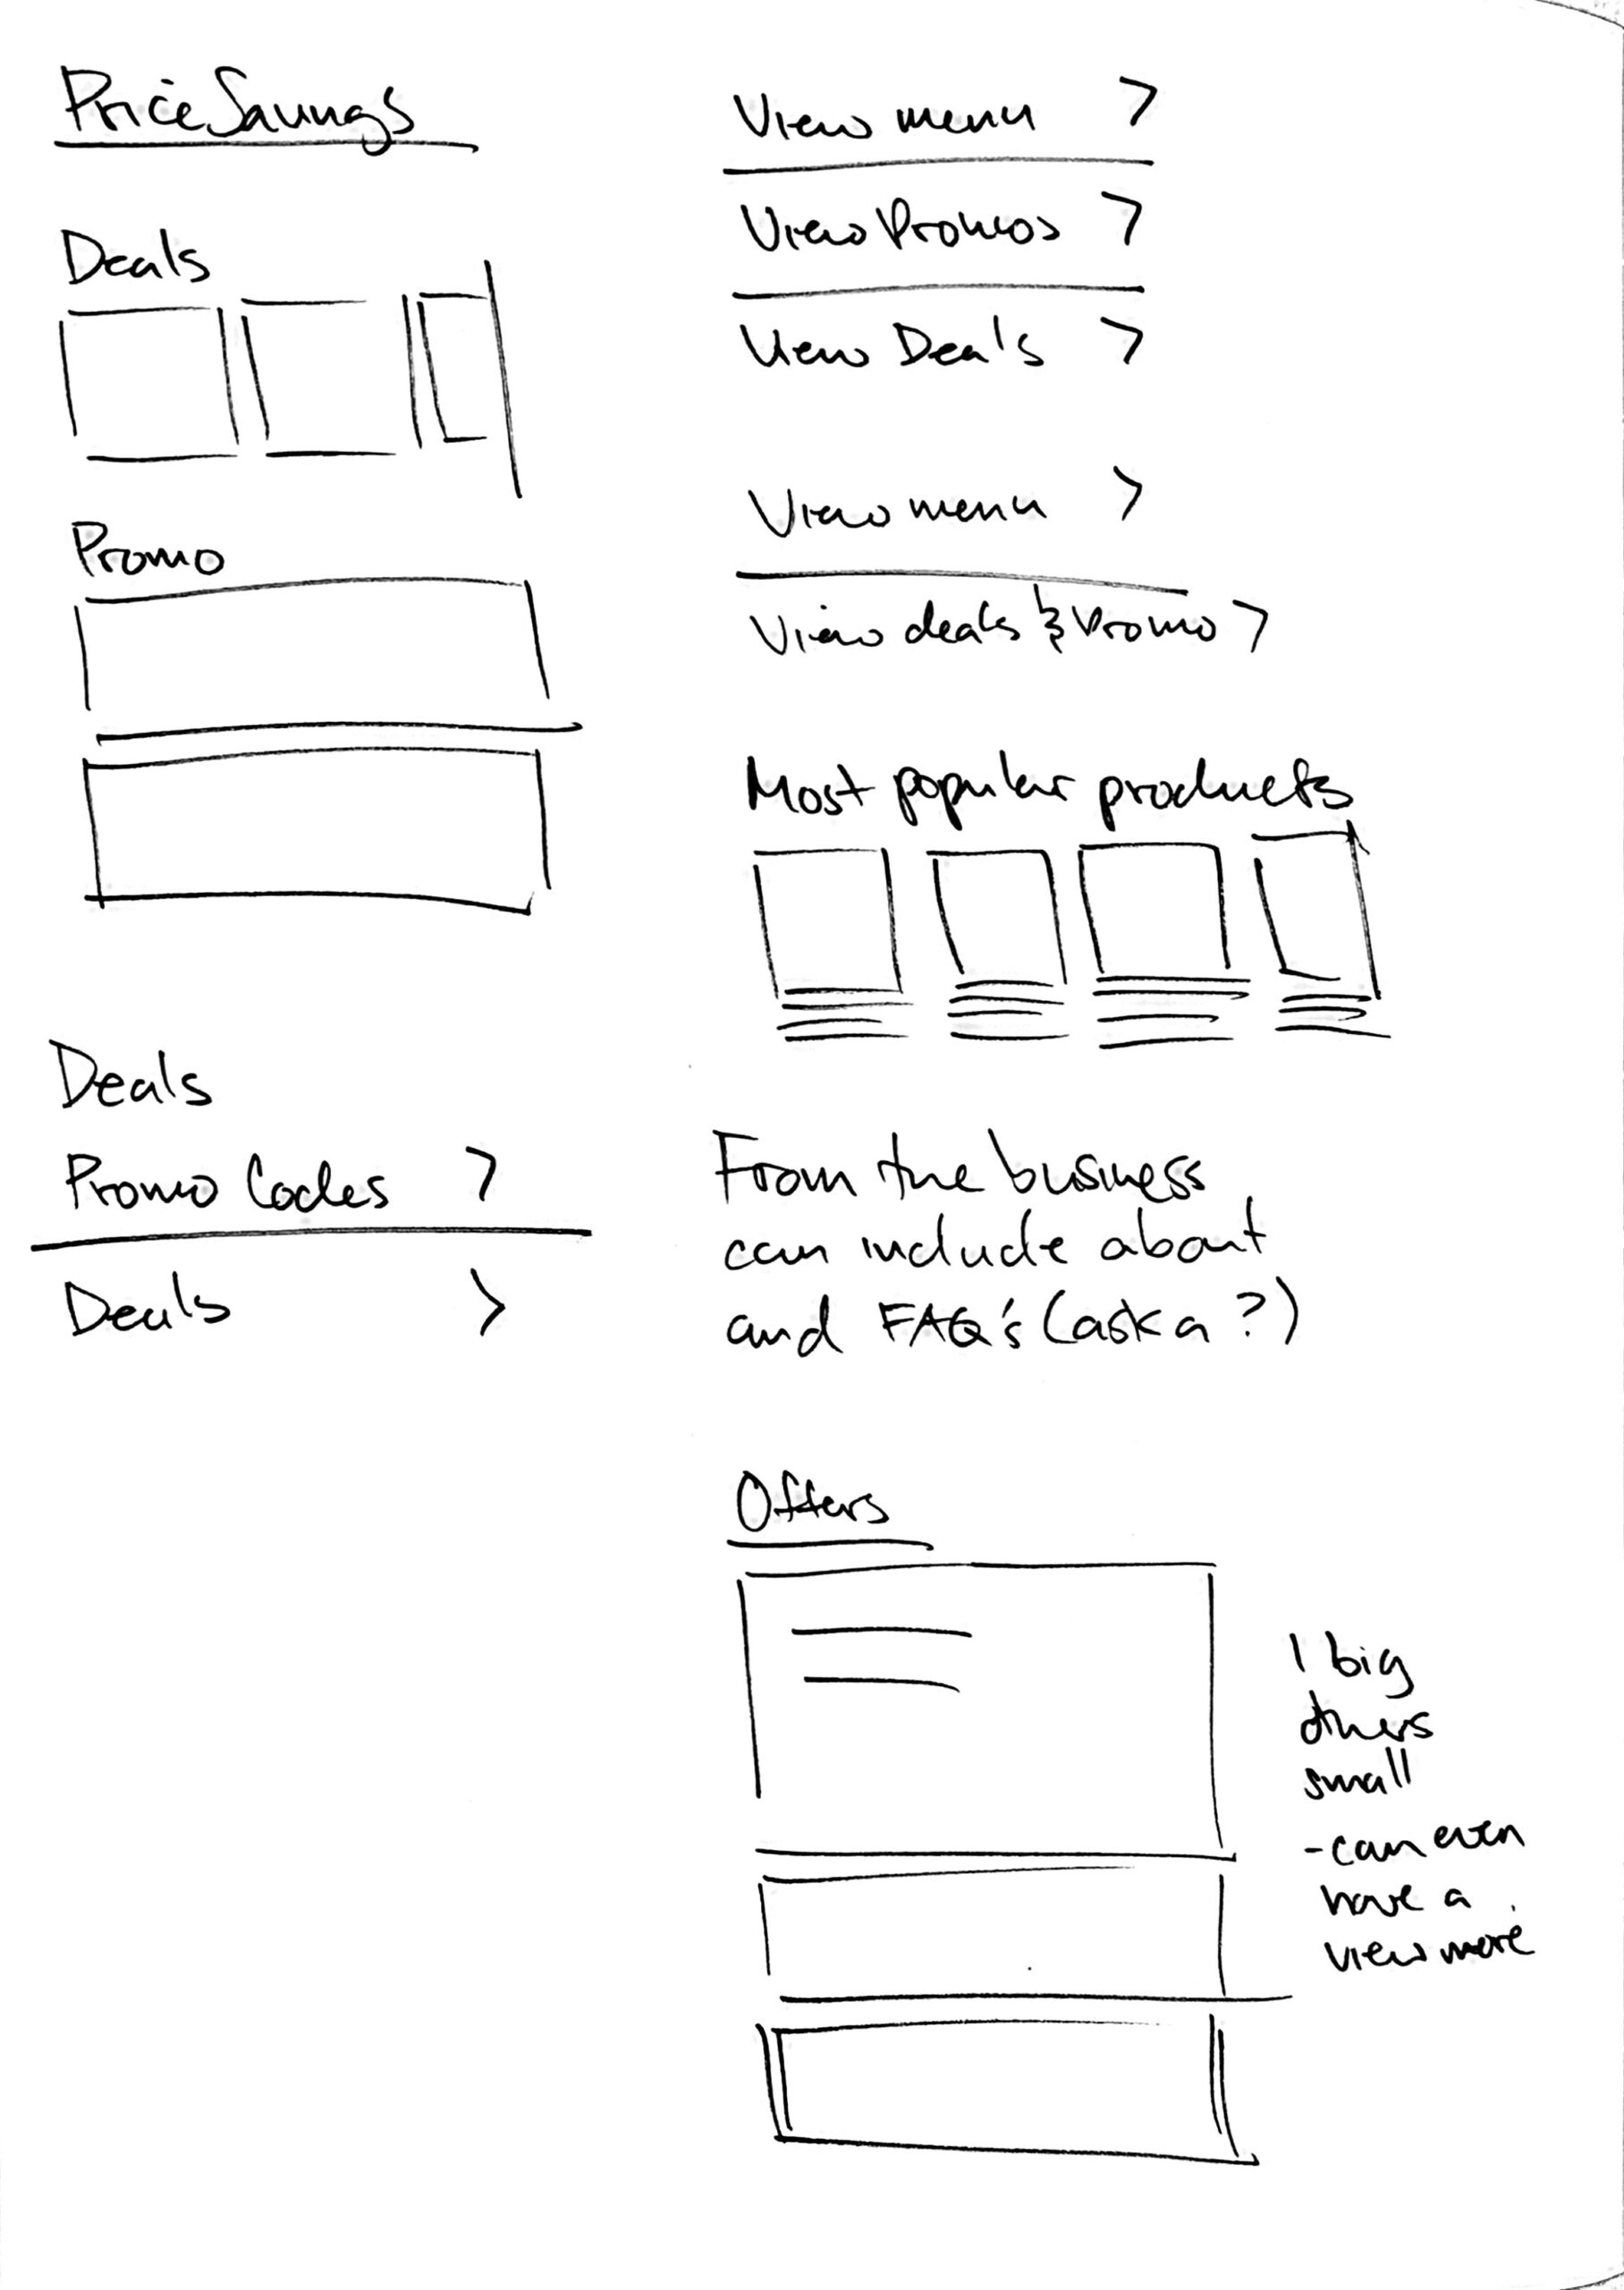 Retailer-overview-sketches-page-3